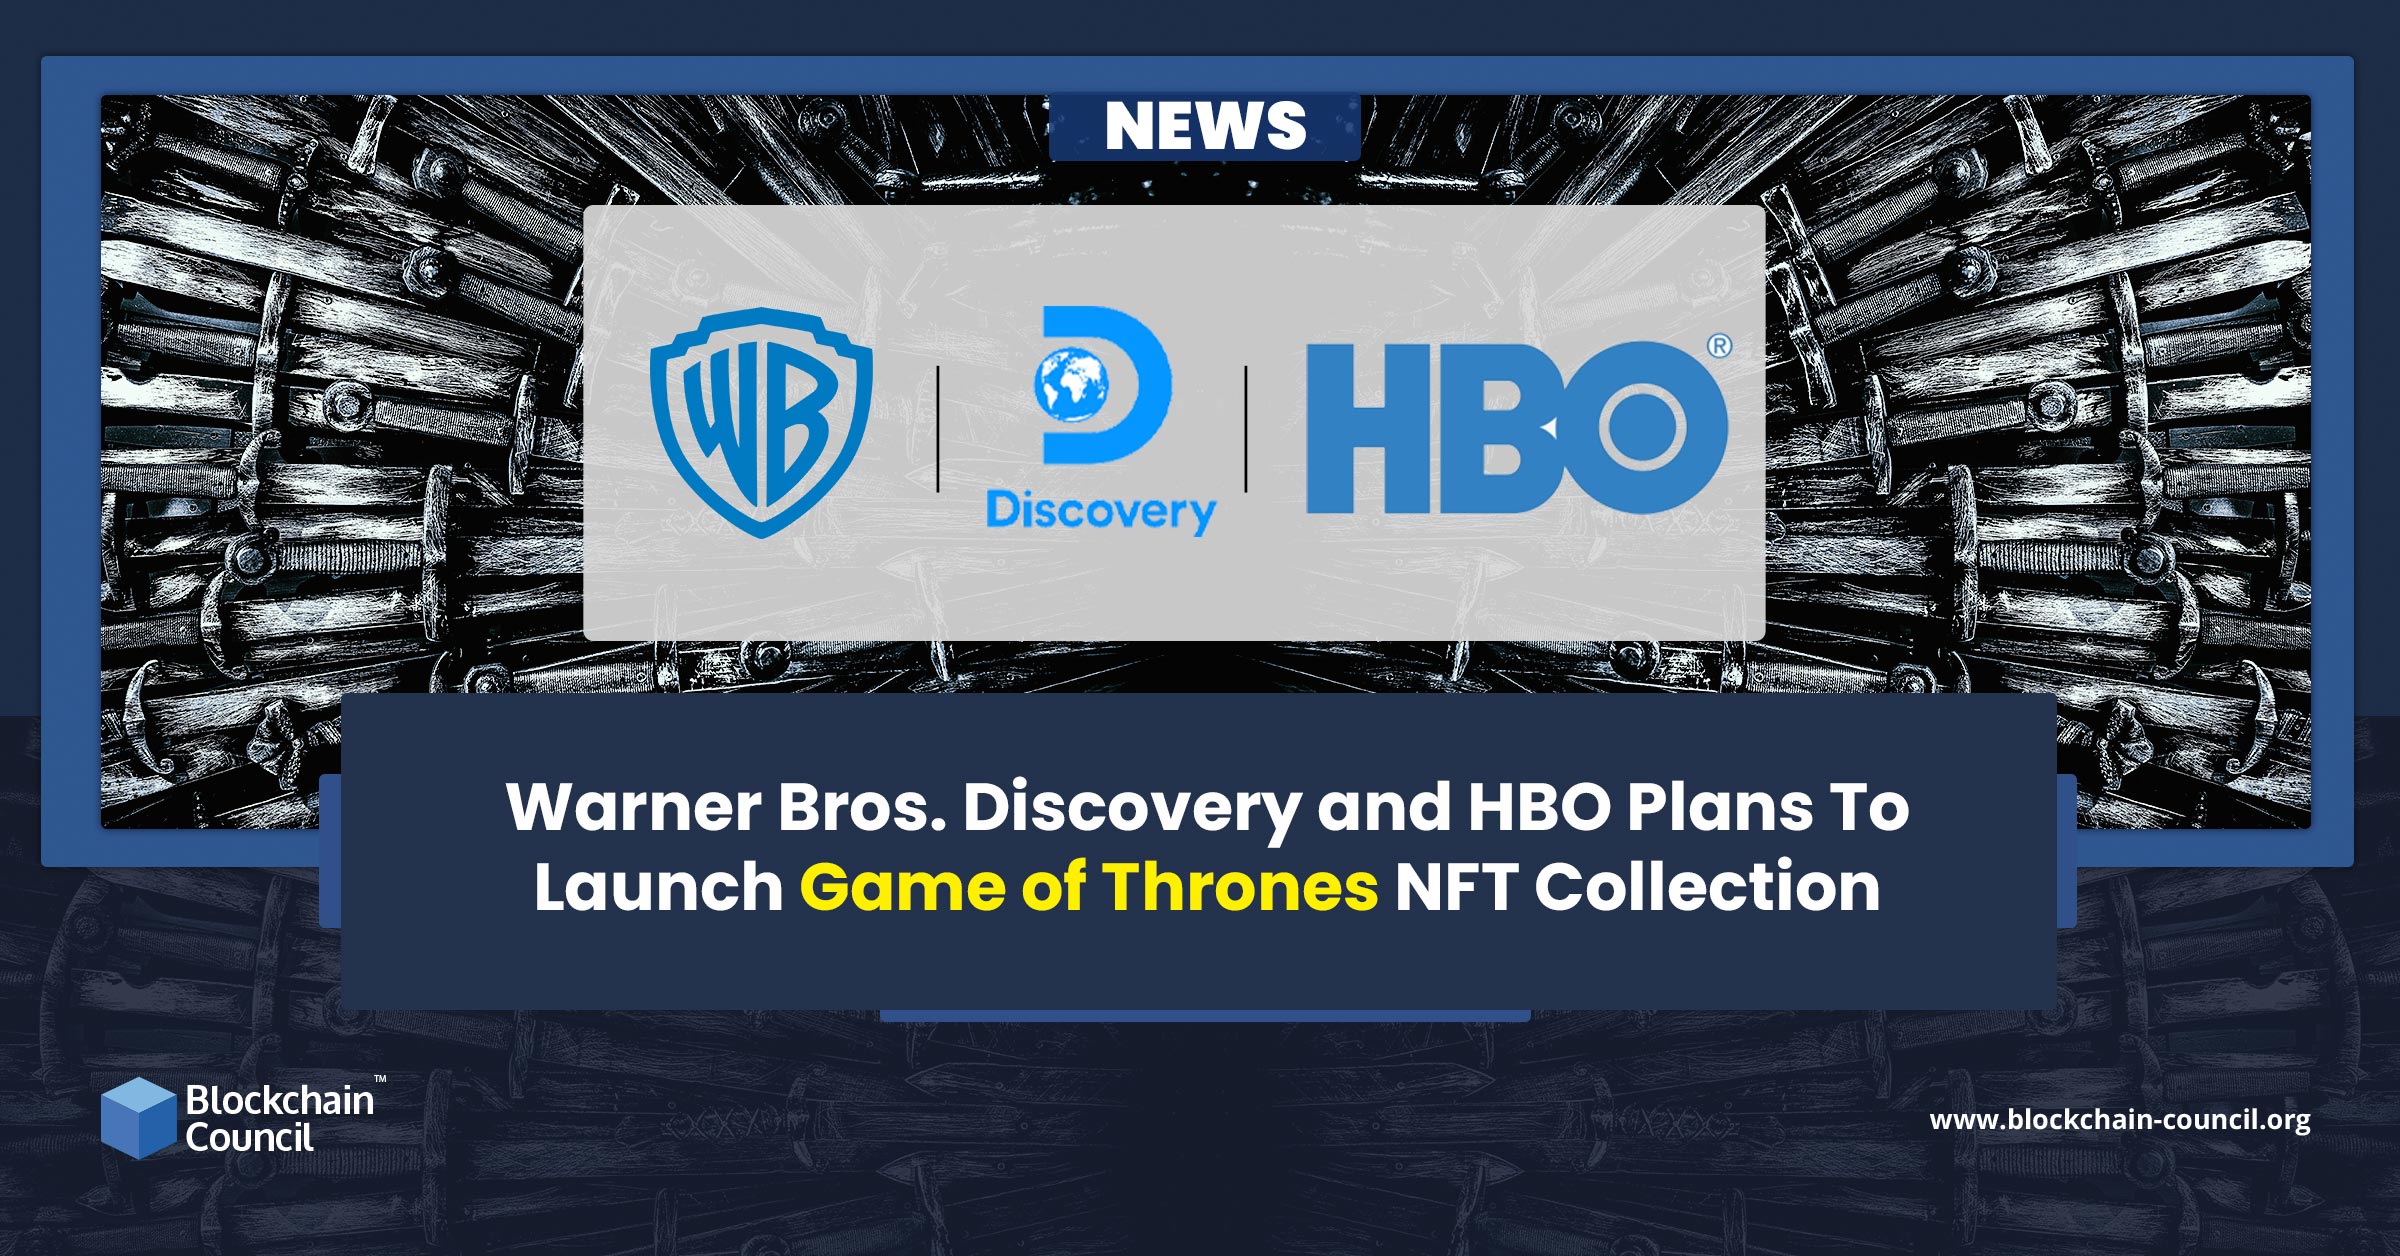 Warner Bros. Discovery and HBO Plans To Launch Game of Thrones NFT Collection